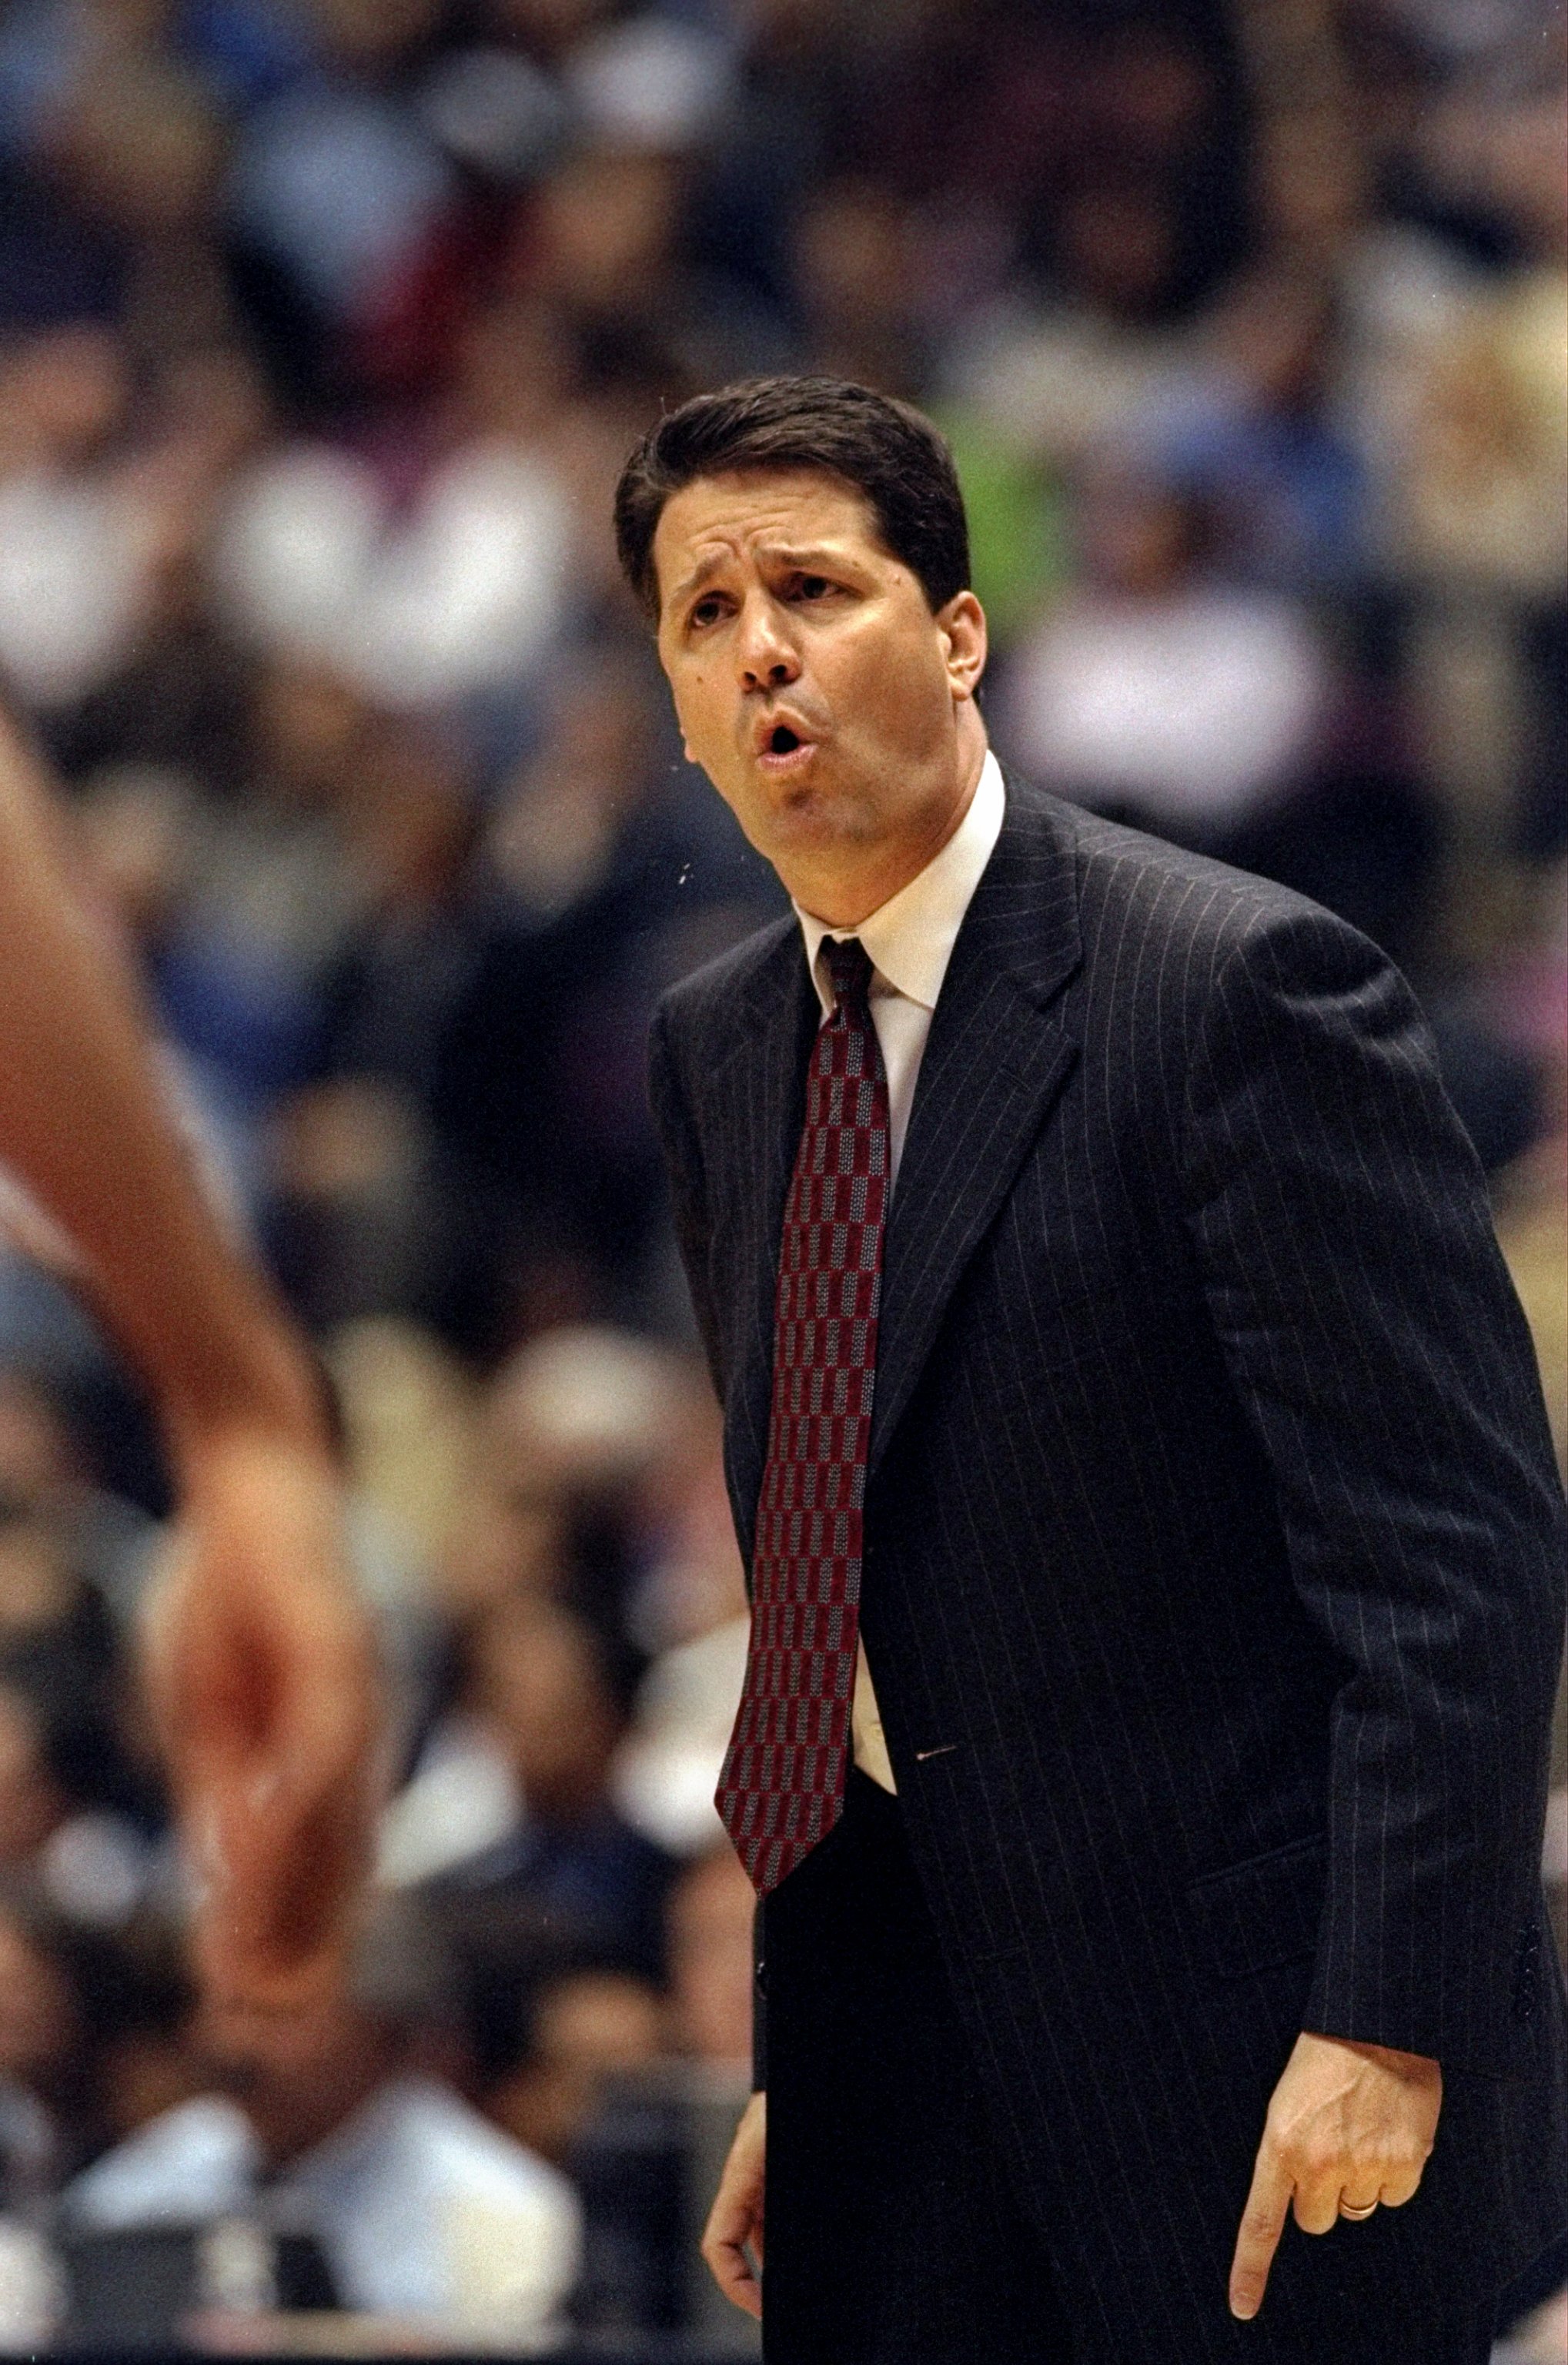 26 Apr 1998:  New Jersey Nets head coach John Calipari looks on during a First Round Playoff Game against the Chicago Bulls at the United Center in Chicago, Illinois. The Bulls defeated the Nets 96-91.